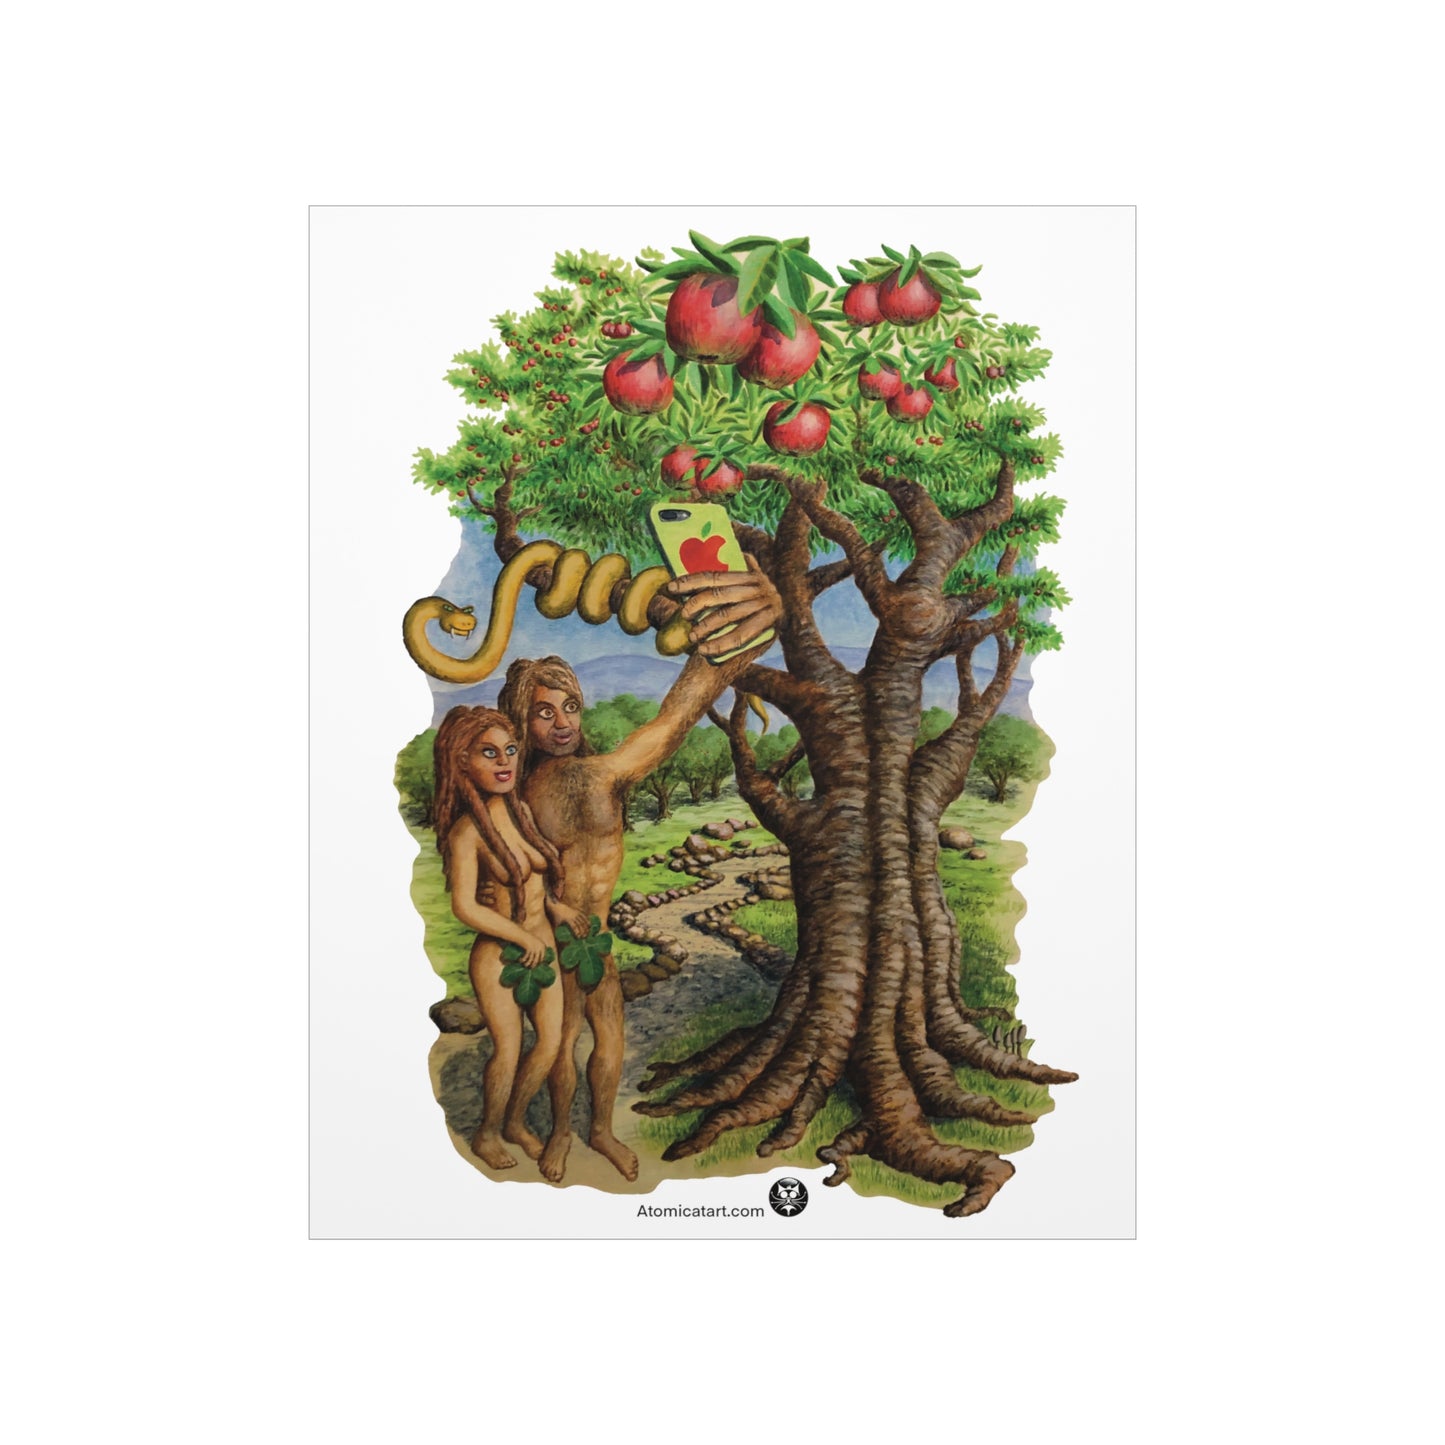 Apple and Eve - Poster